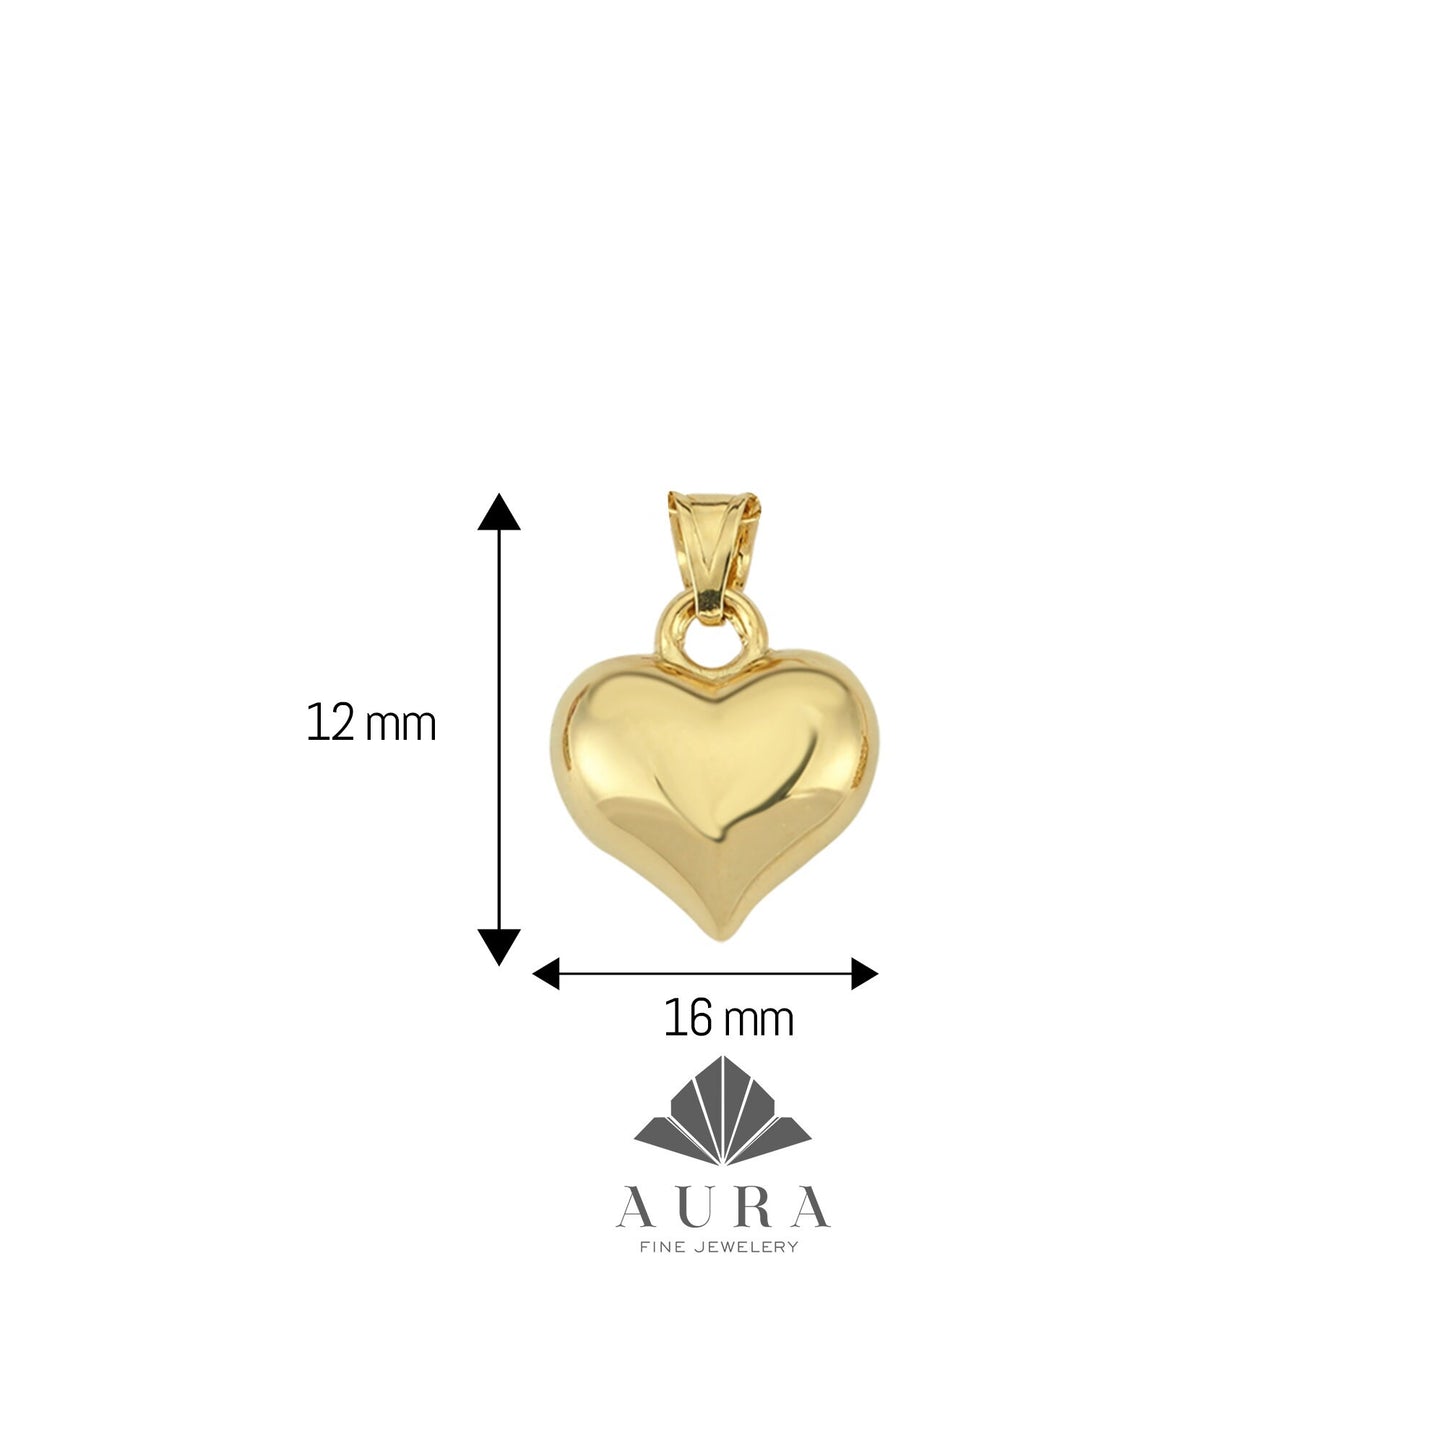 14K Gold Puffed Heart Necklace, 3D Heart Pendant, Gold Love Choker, Mini Heart Charm, Dainty Heart Necklace, Gift For Her